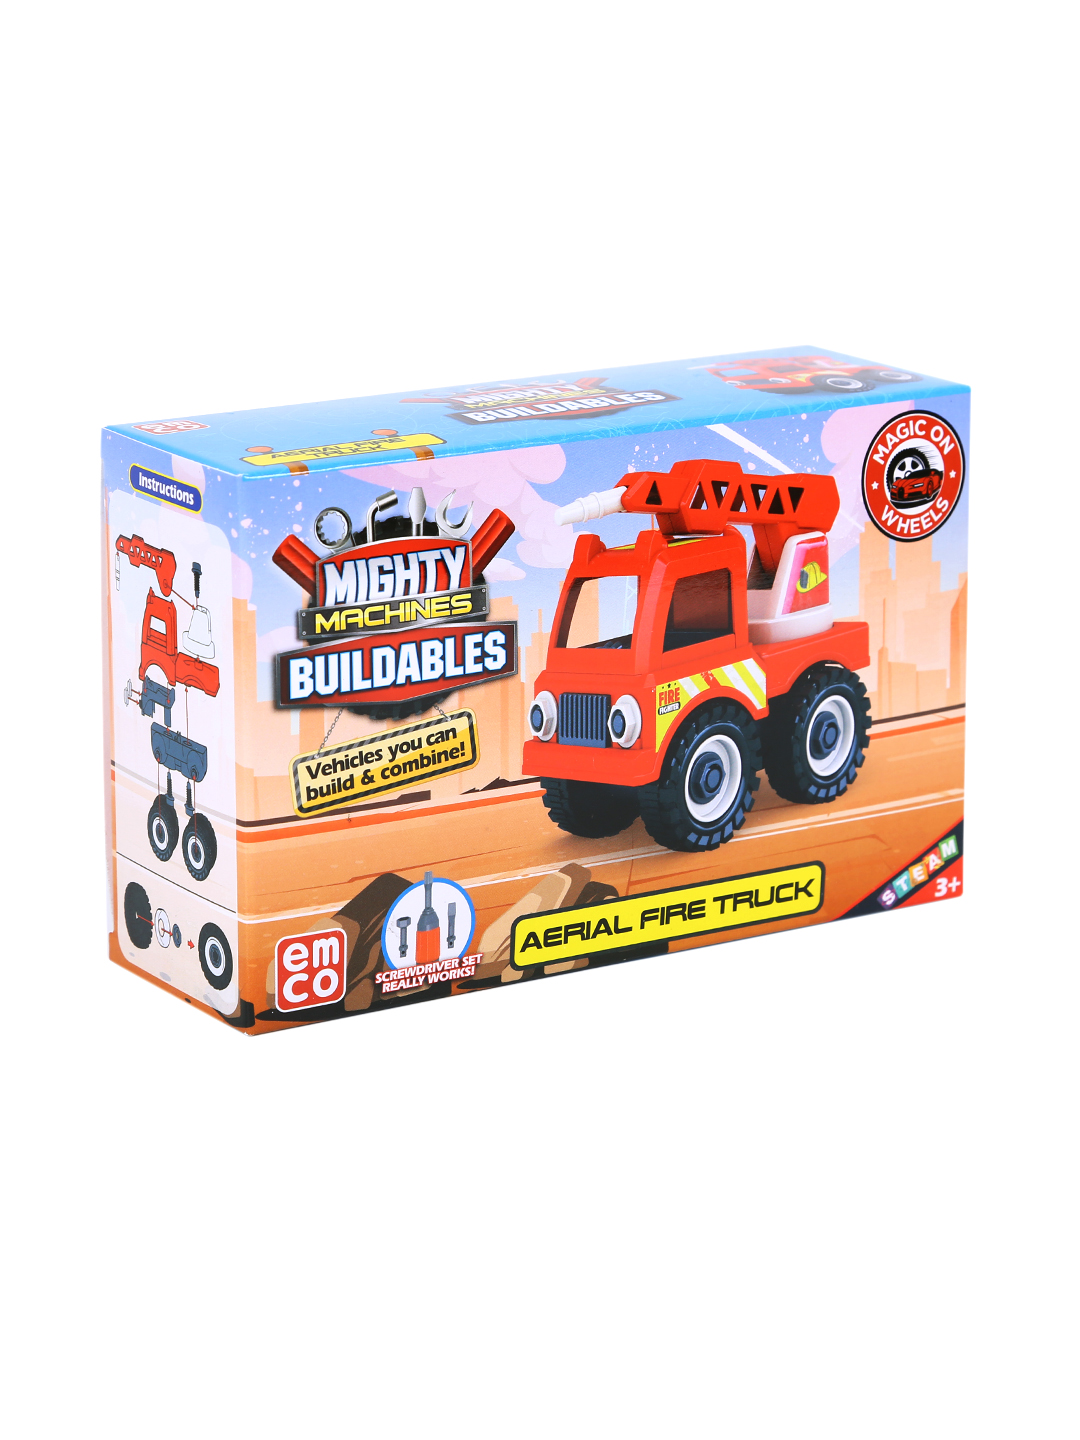 Mighty Machines Buildables-Aerial Fire Truck For Kids 3 Years and Above